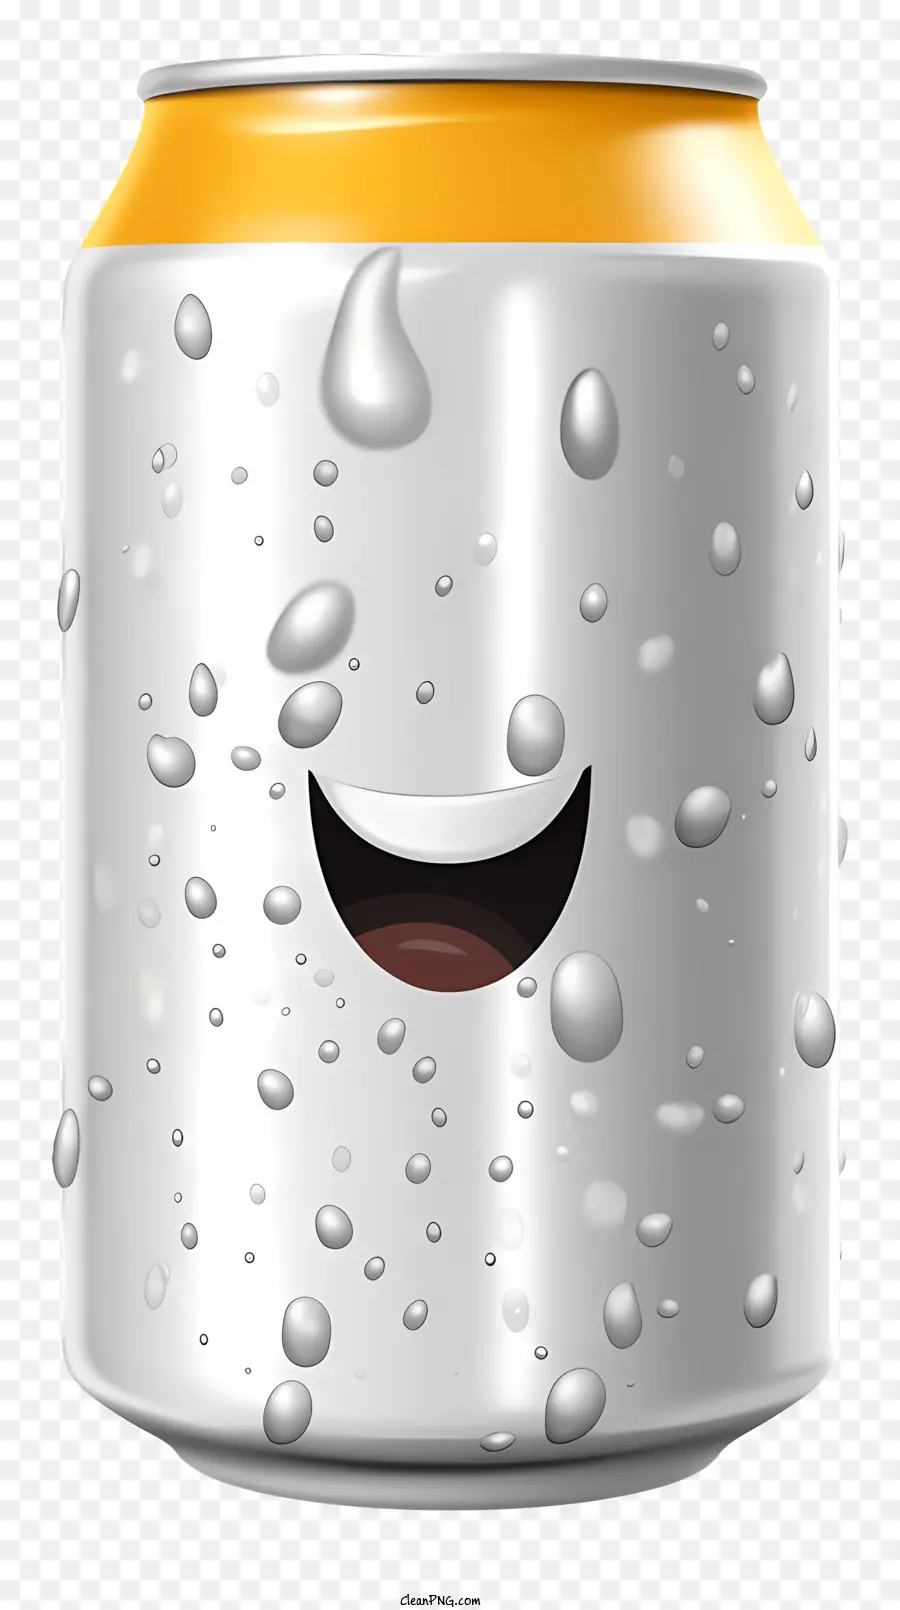 beer can emoji can smile droplets water